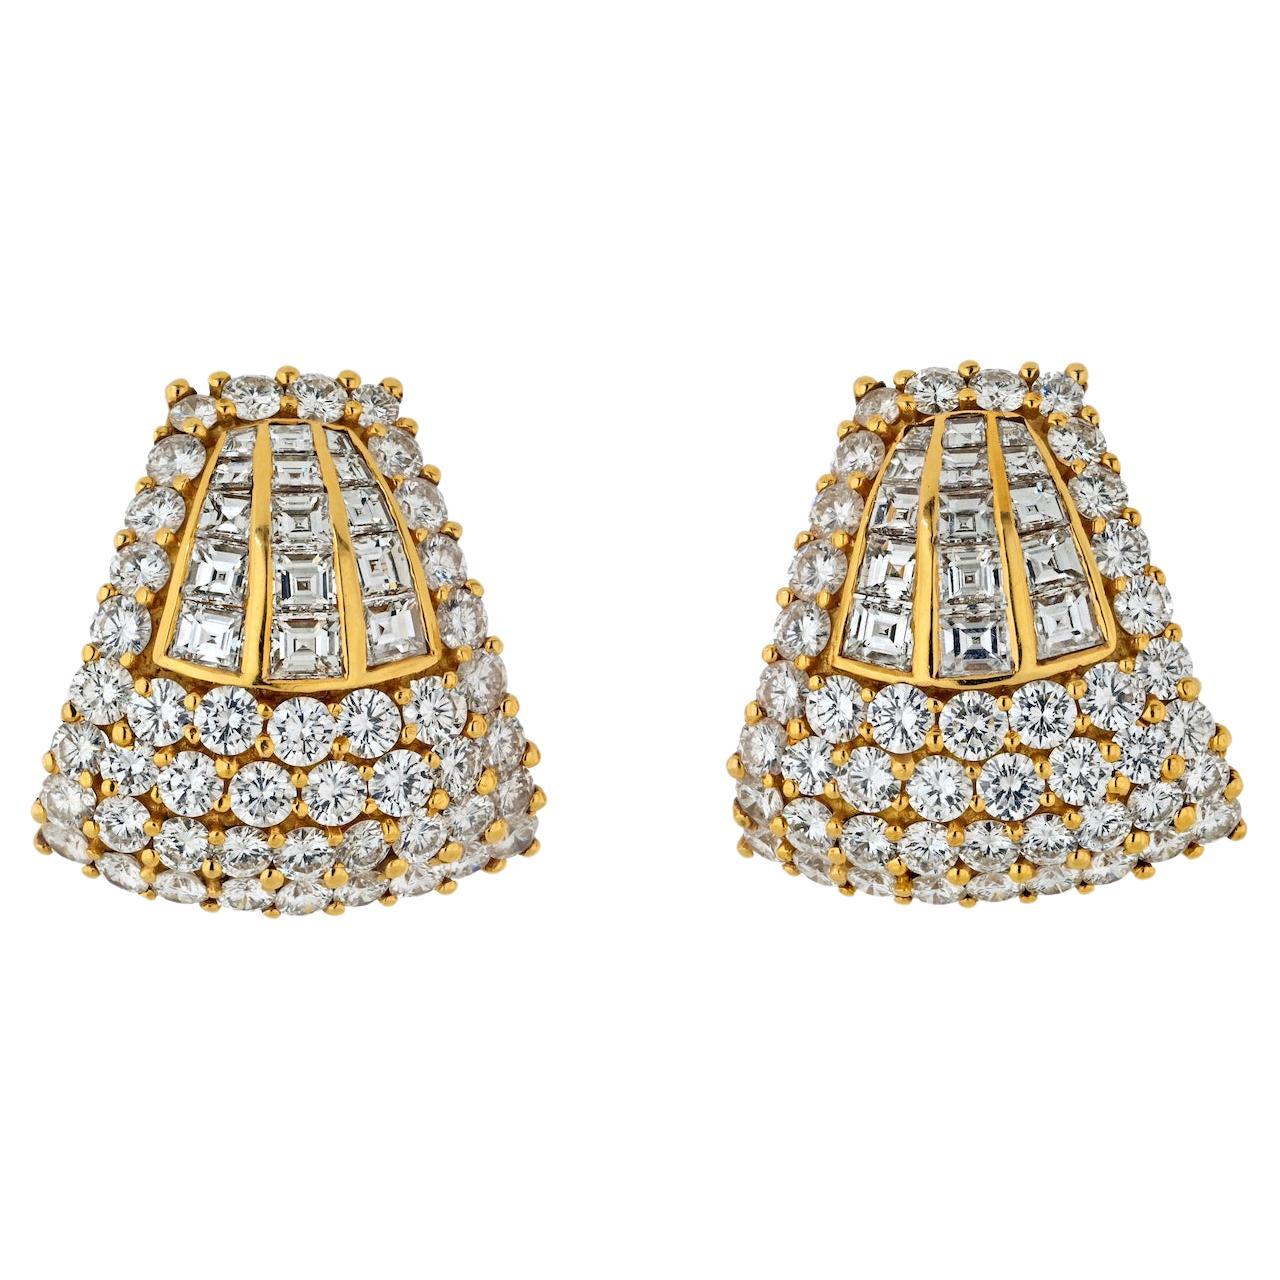 18K Yellow Gold 18.00cttw Round And Asscher Cut Diamond Earrings For Sale